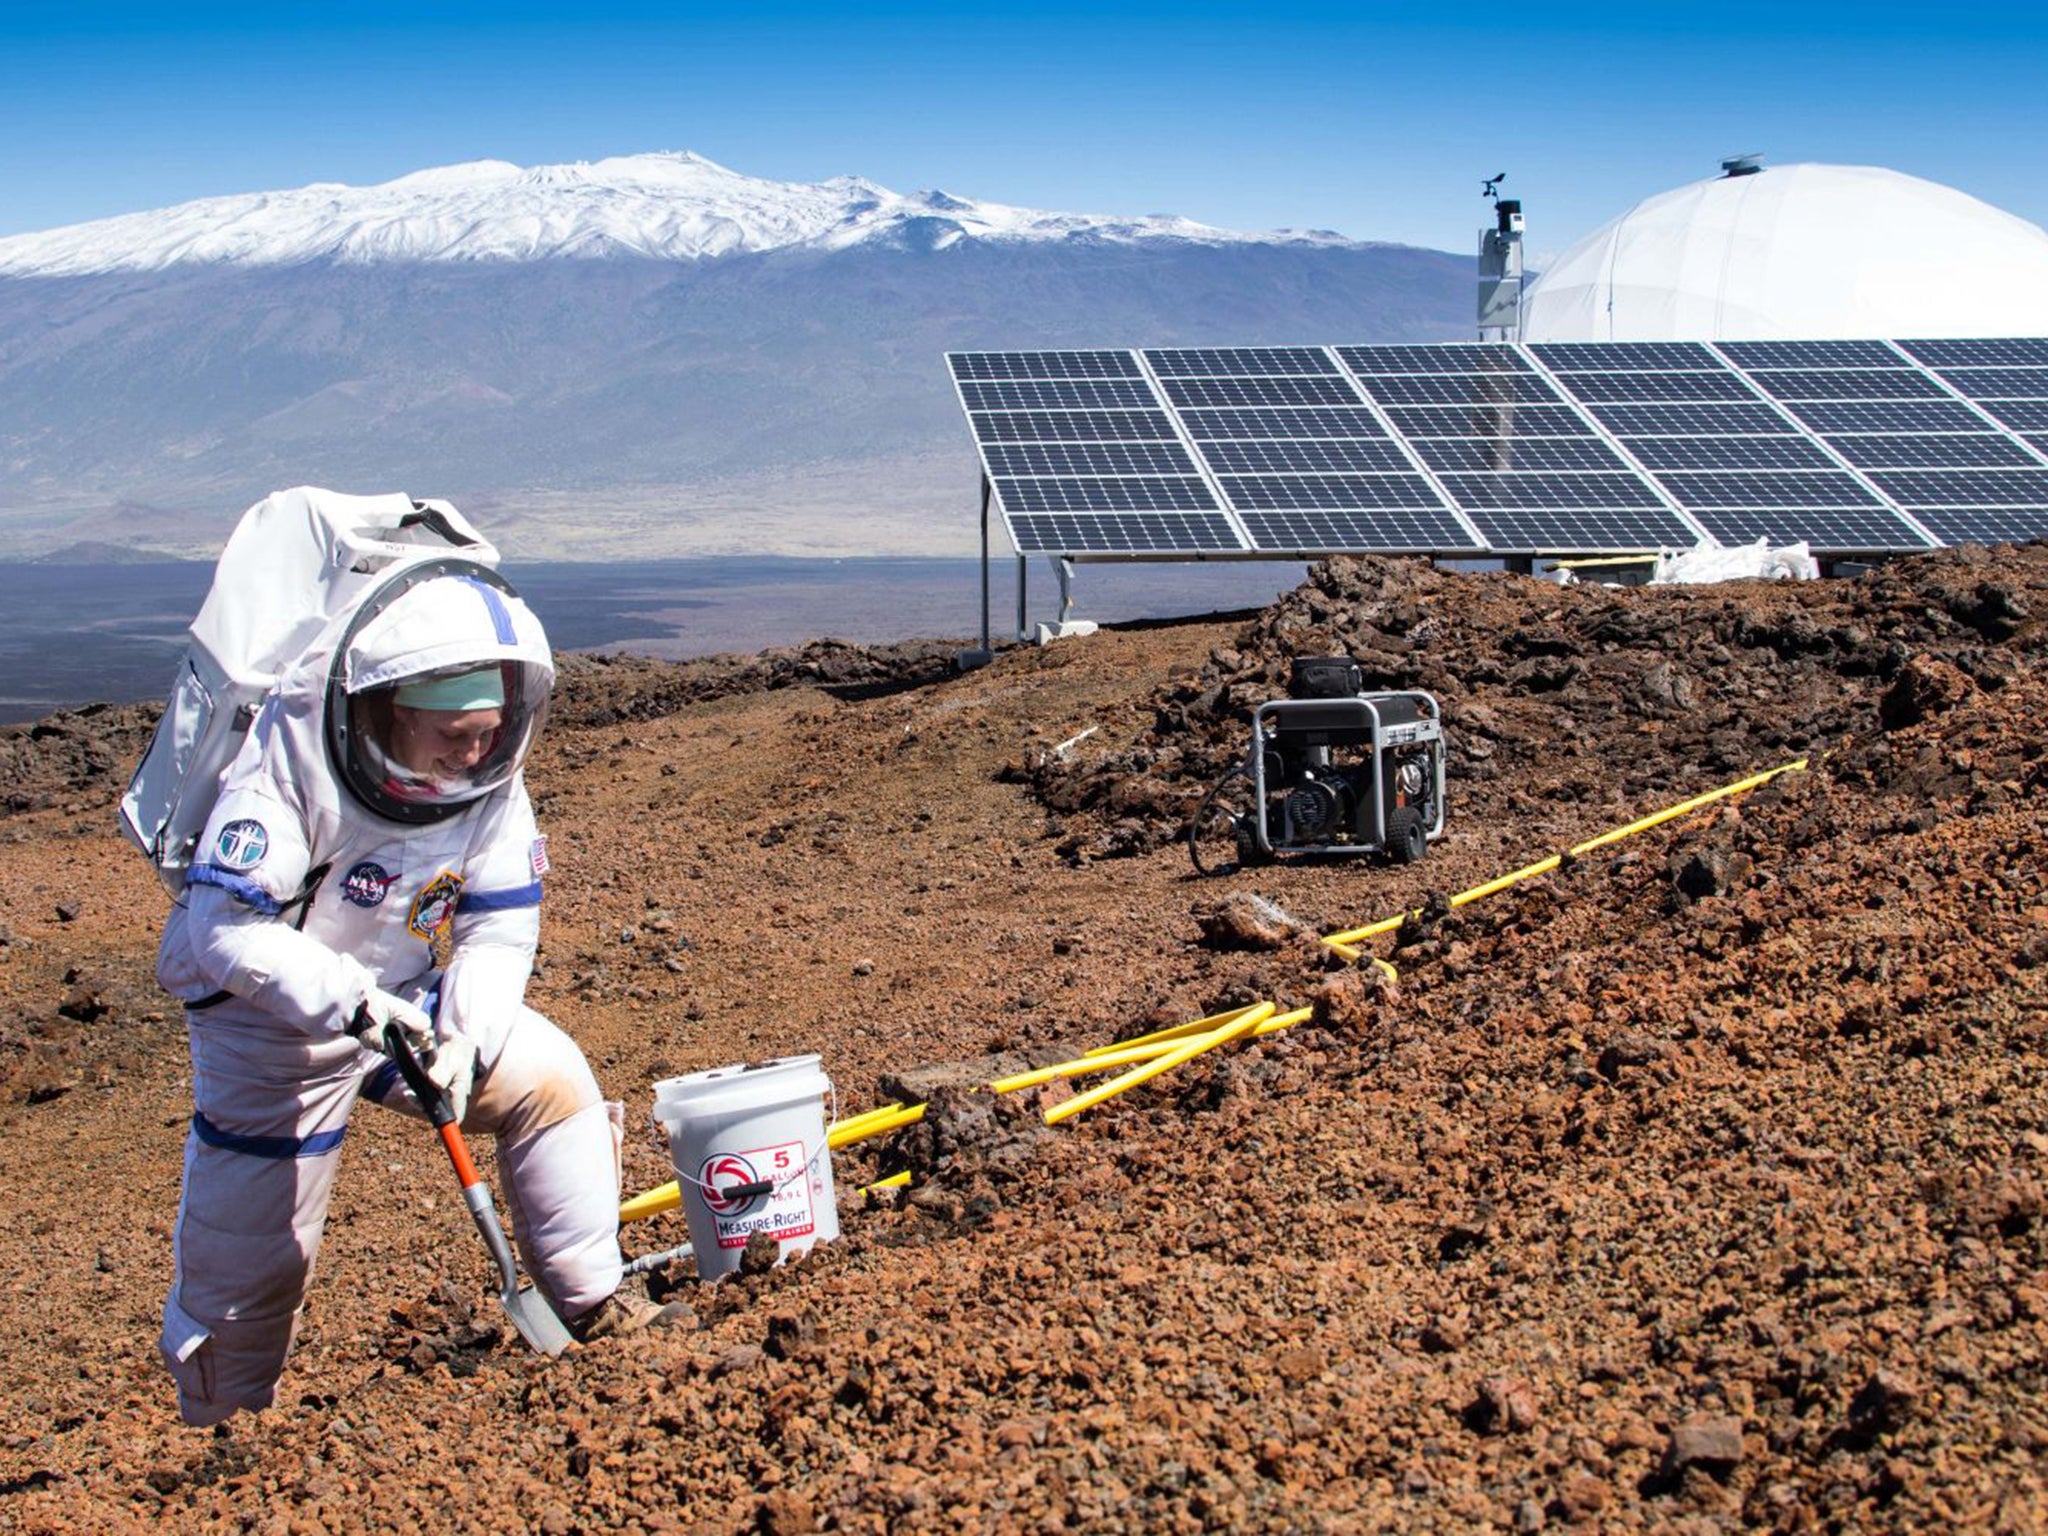 Martha Lenio collects a soil sample on the slopes of Mauna Loa, Hawaii, where the experiment took place